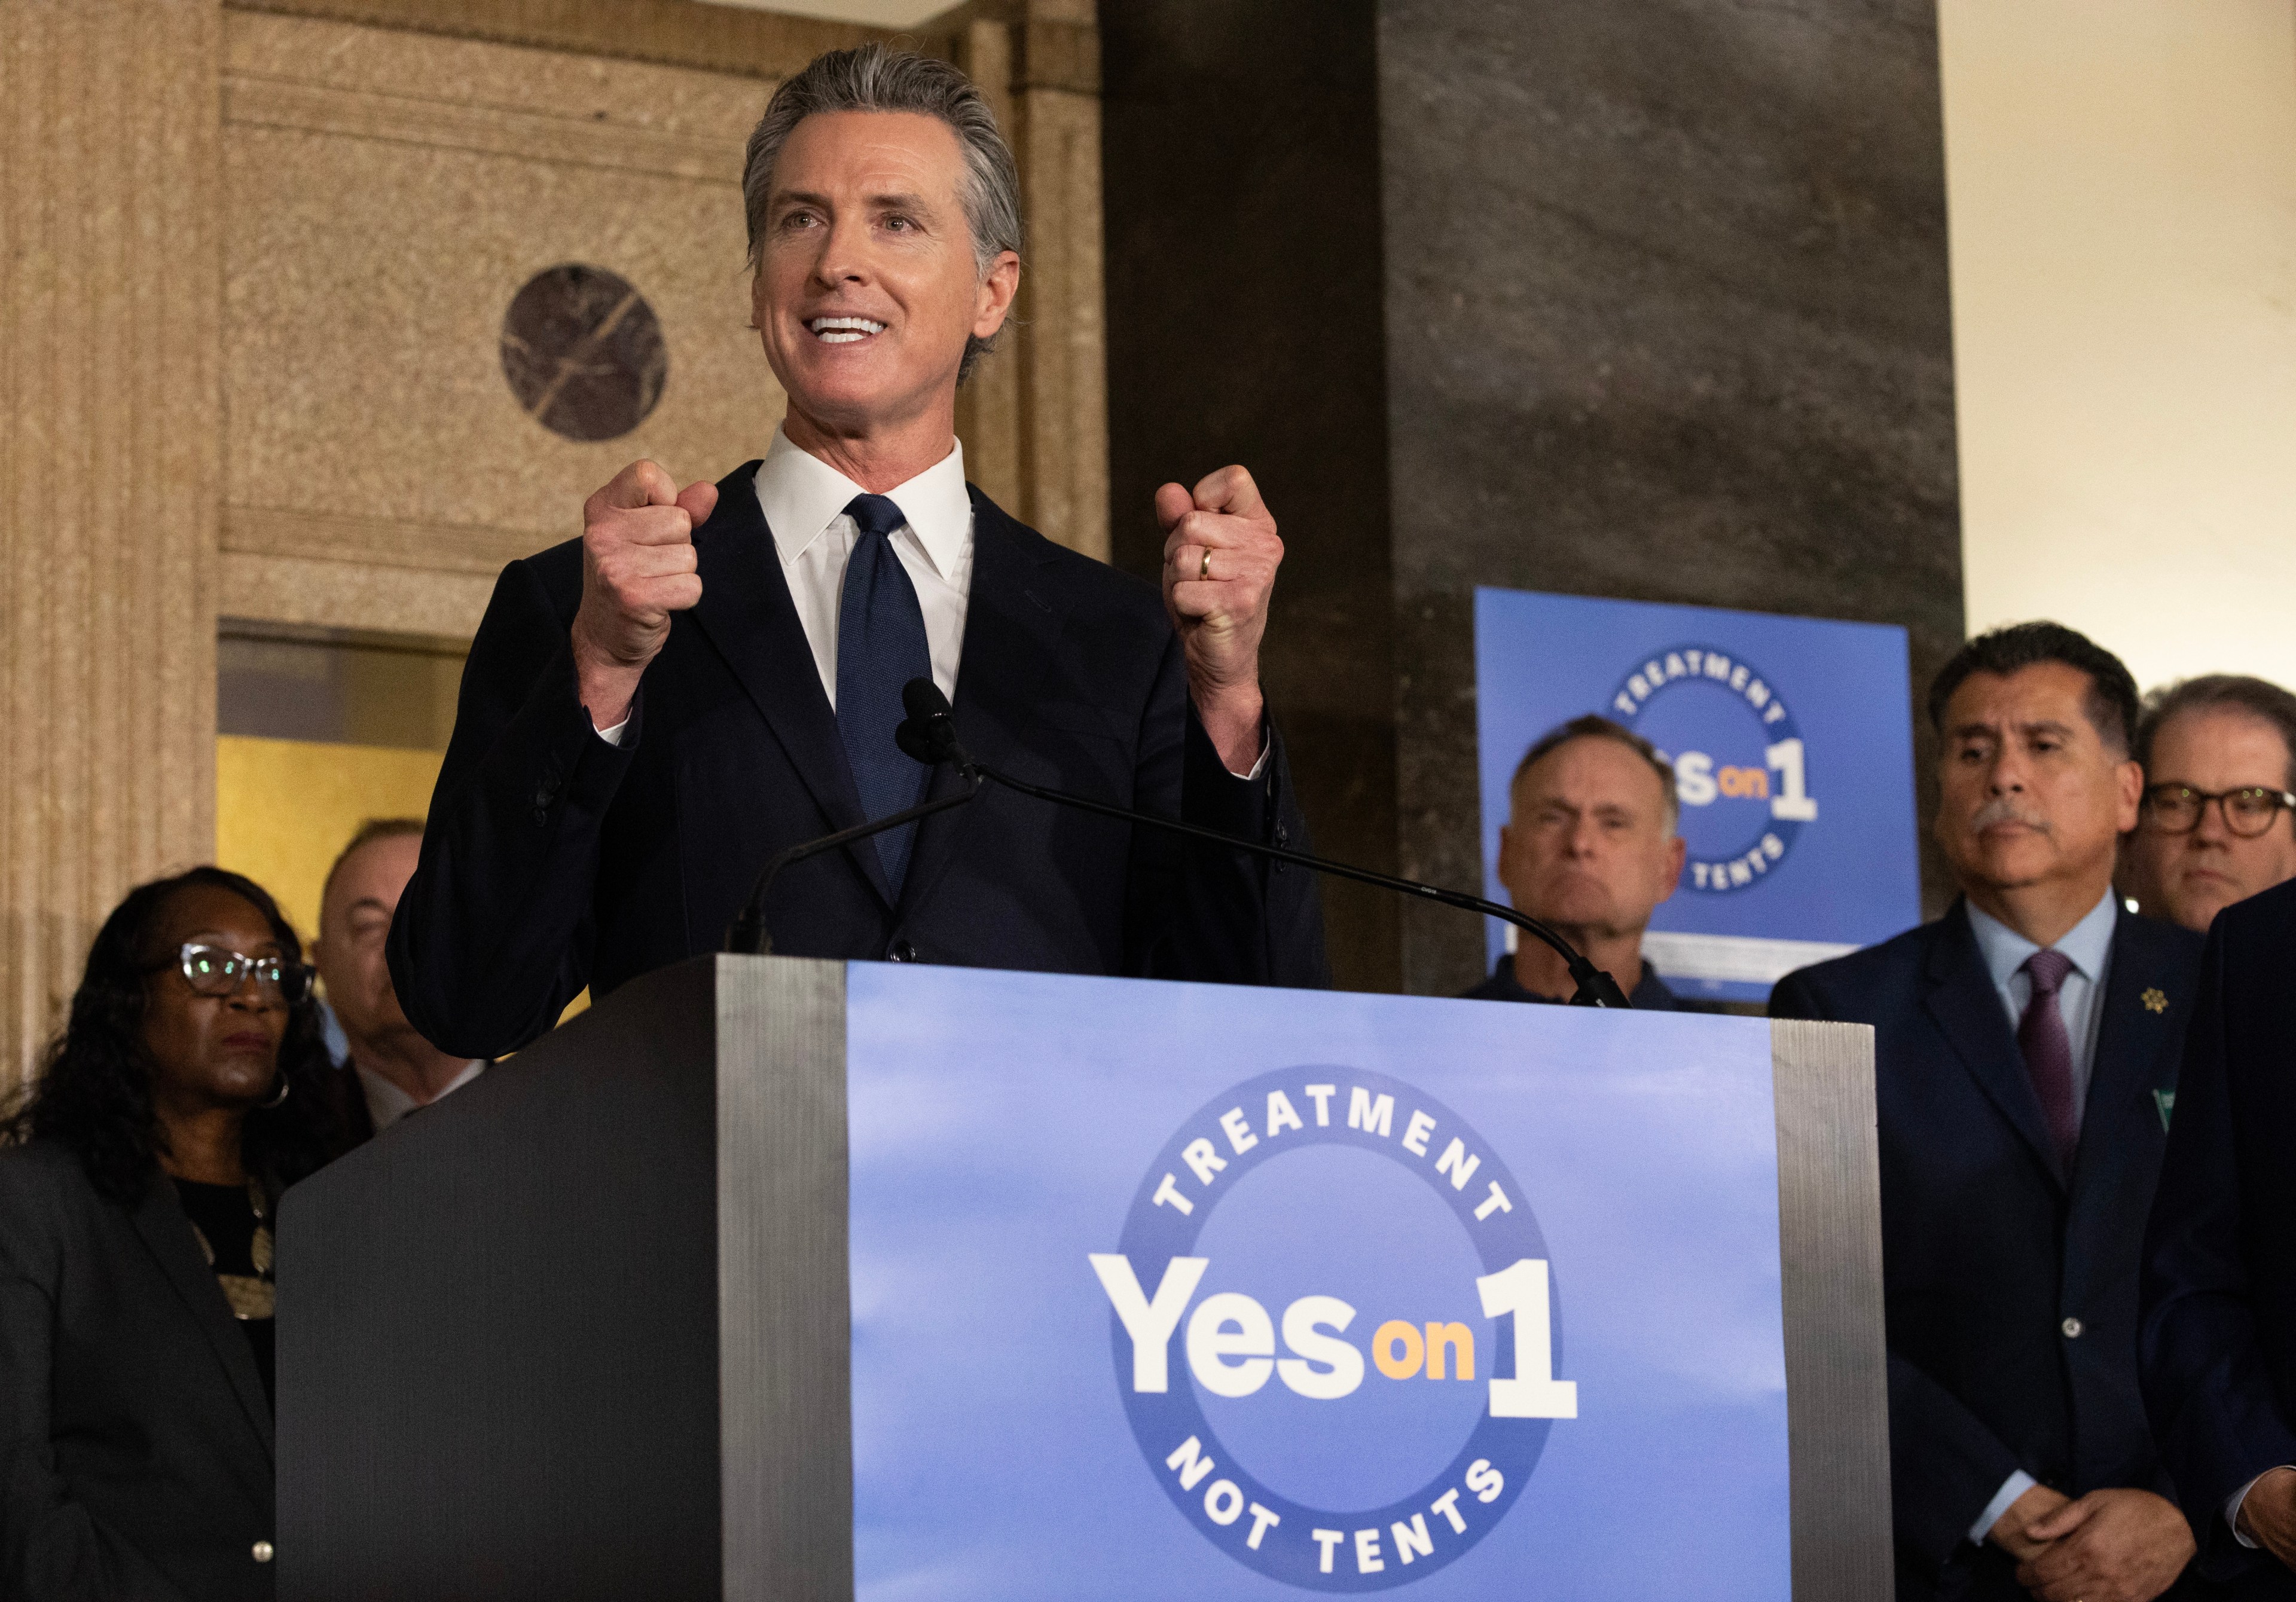 A man at a podium gestures passionately, with a &quot;Yes on 1&quot; sign, and attentive people around him.